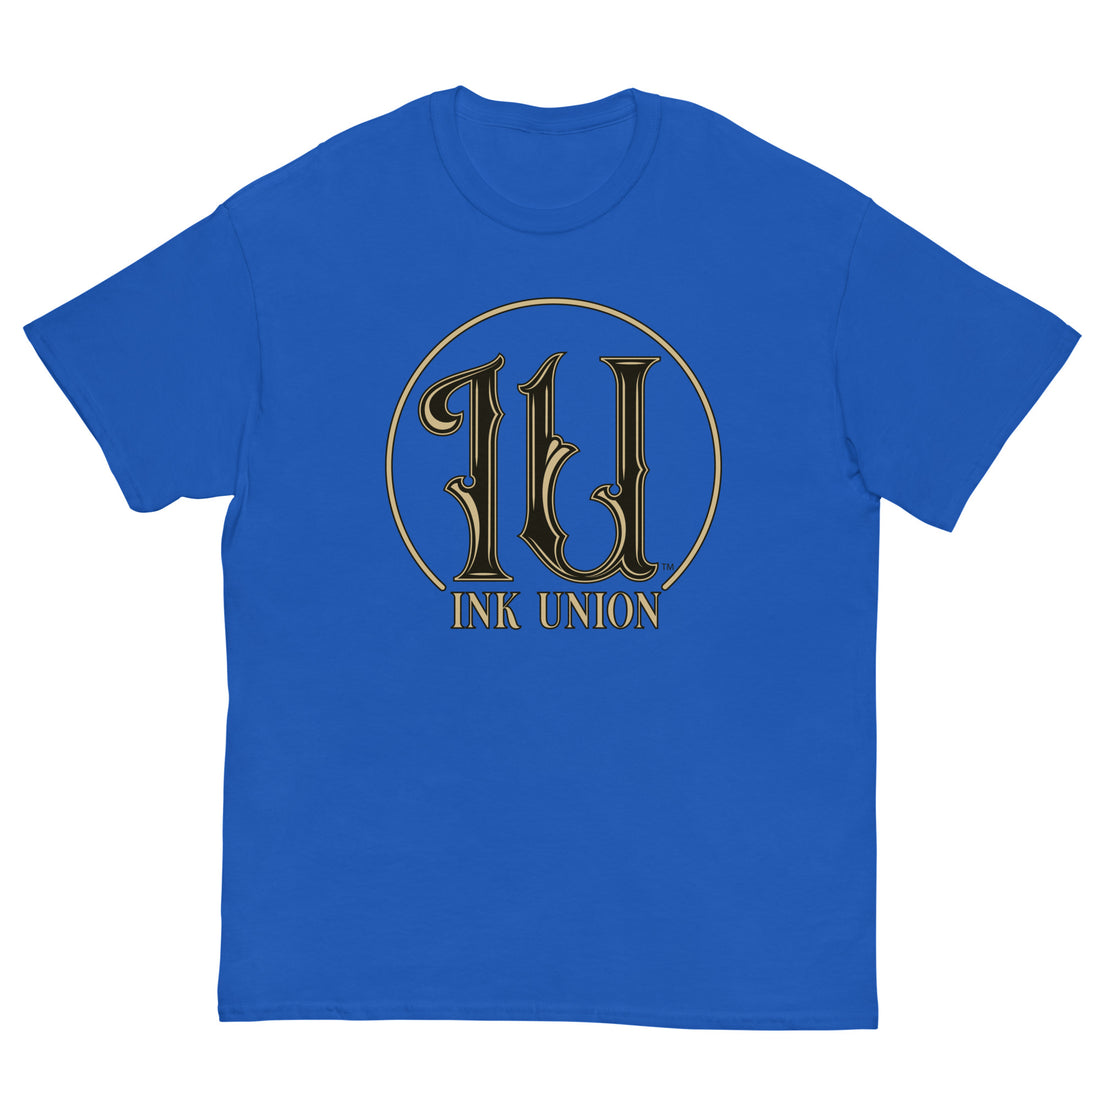 Ink Union Clothing Co. royal blue t-shirt featuring the Ink Union ring logo in black and gold.